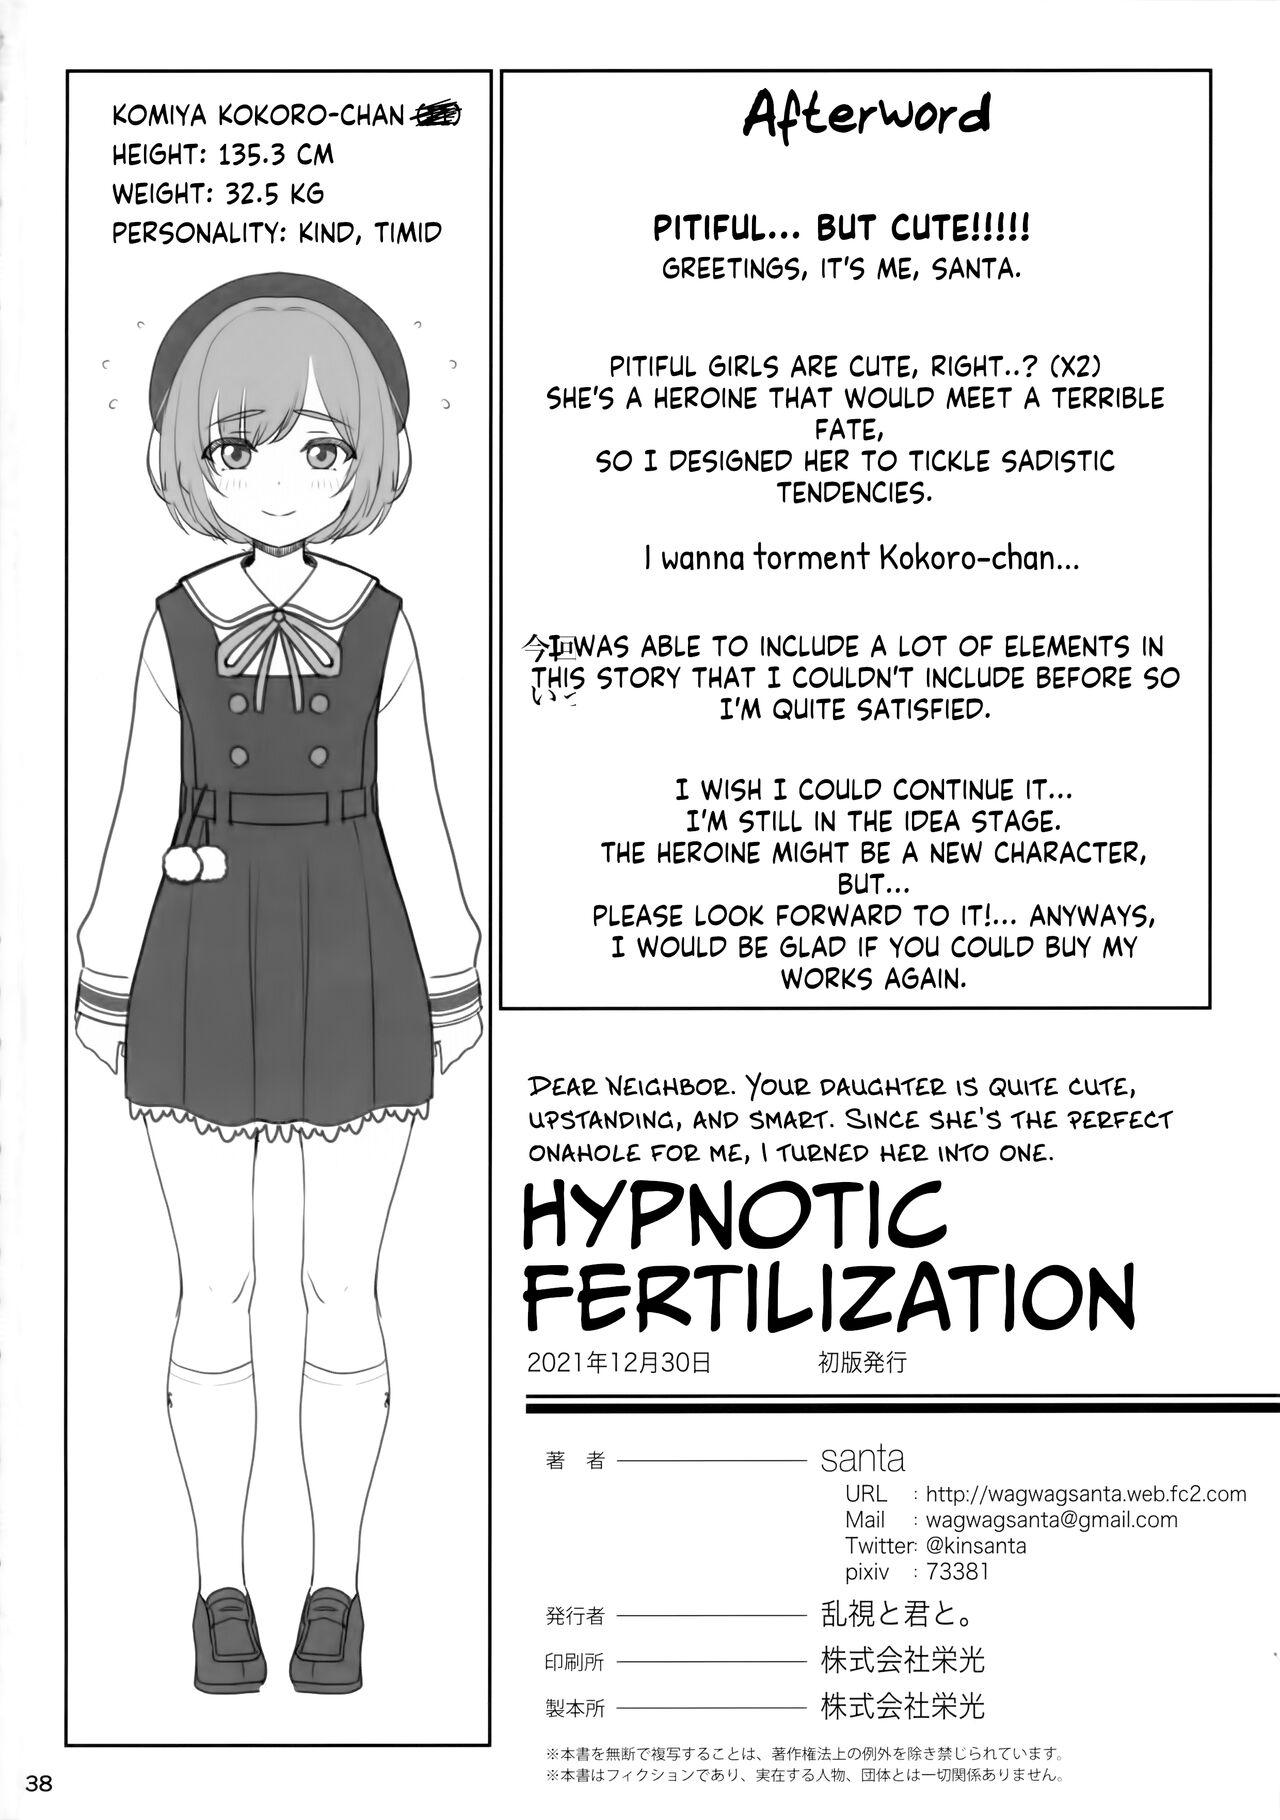 Dear Neighbor. Your daughter is quite cute, upstanding, and smart. Since she's the perfect onahole for me, I turned her into one. Hypnotic Fertilization: Proposal 38